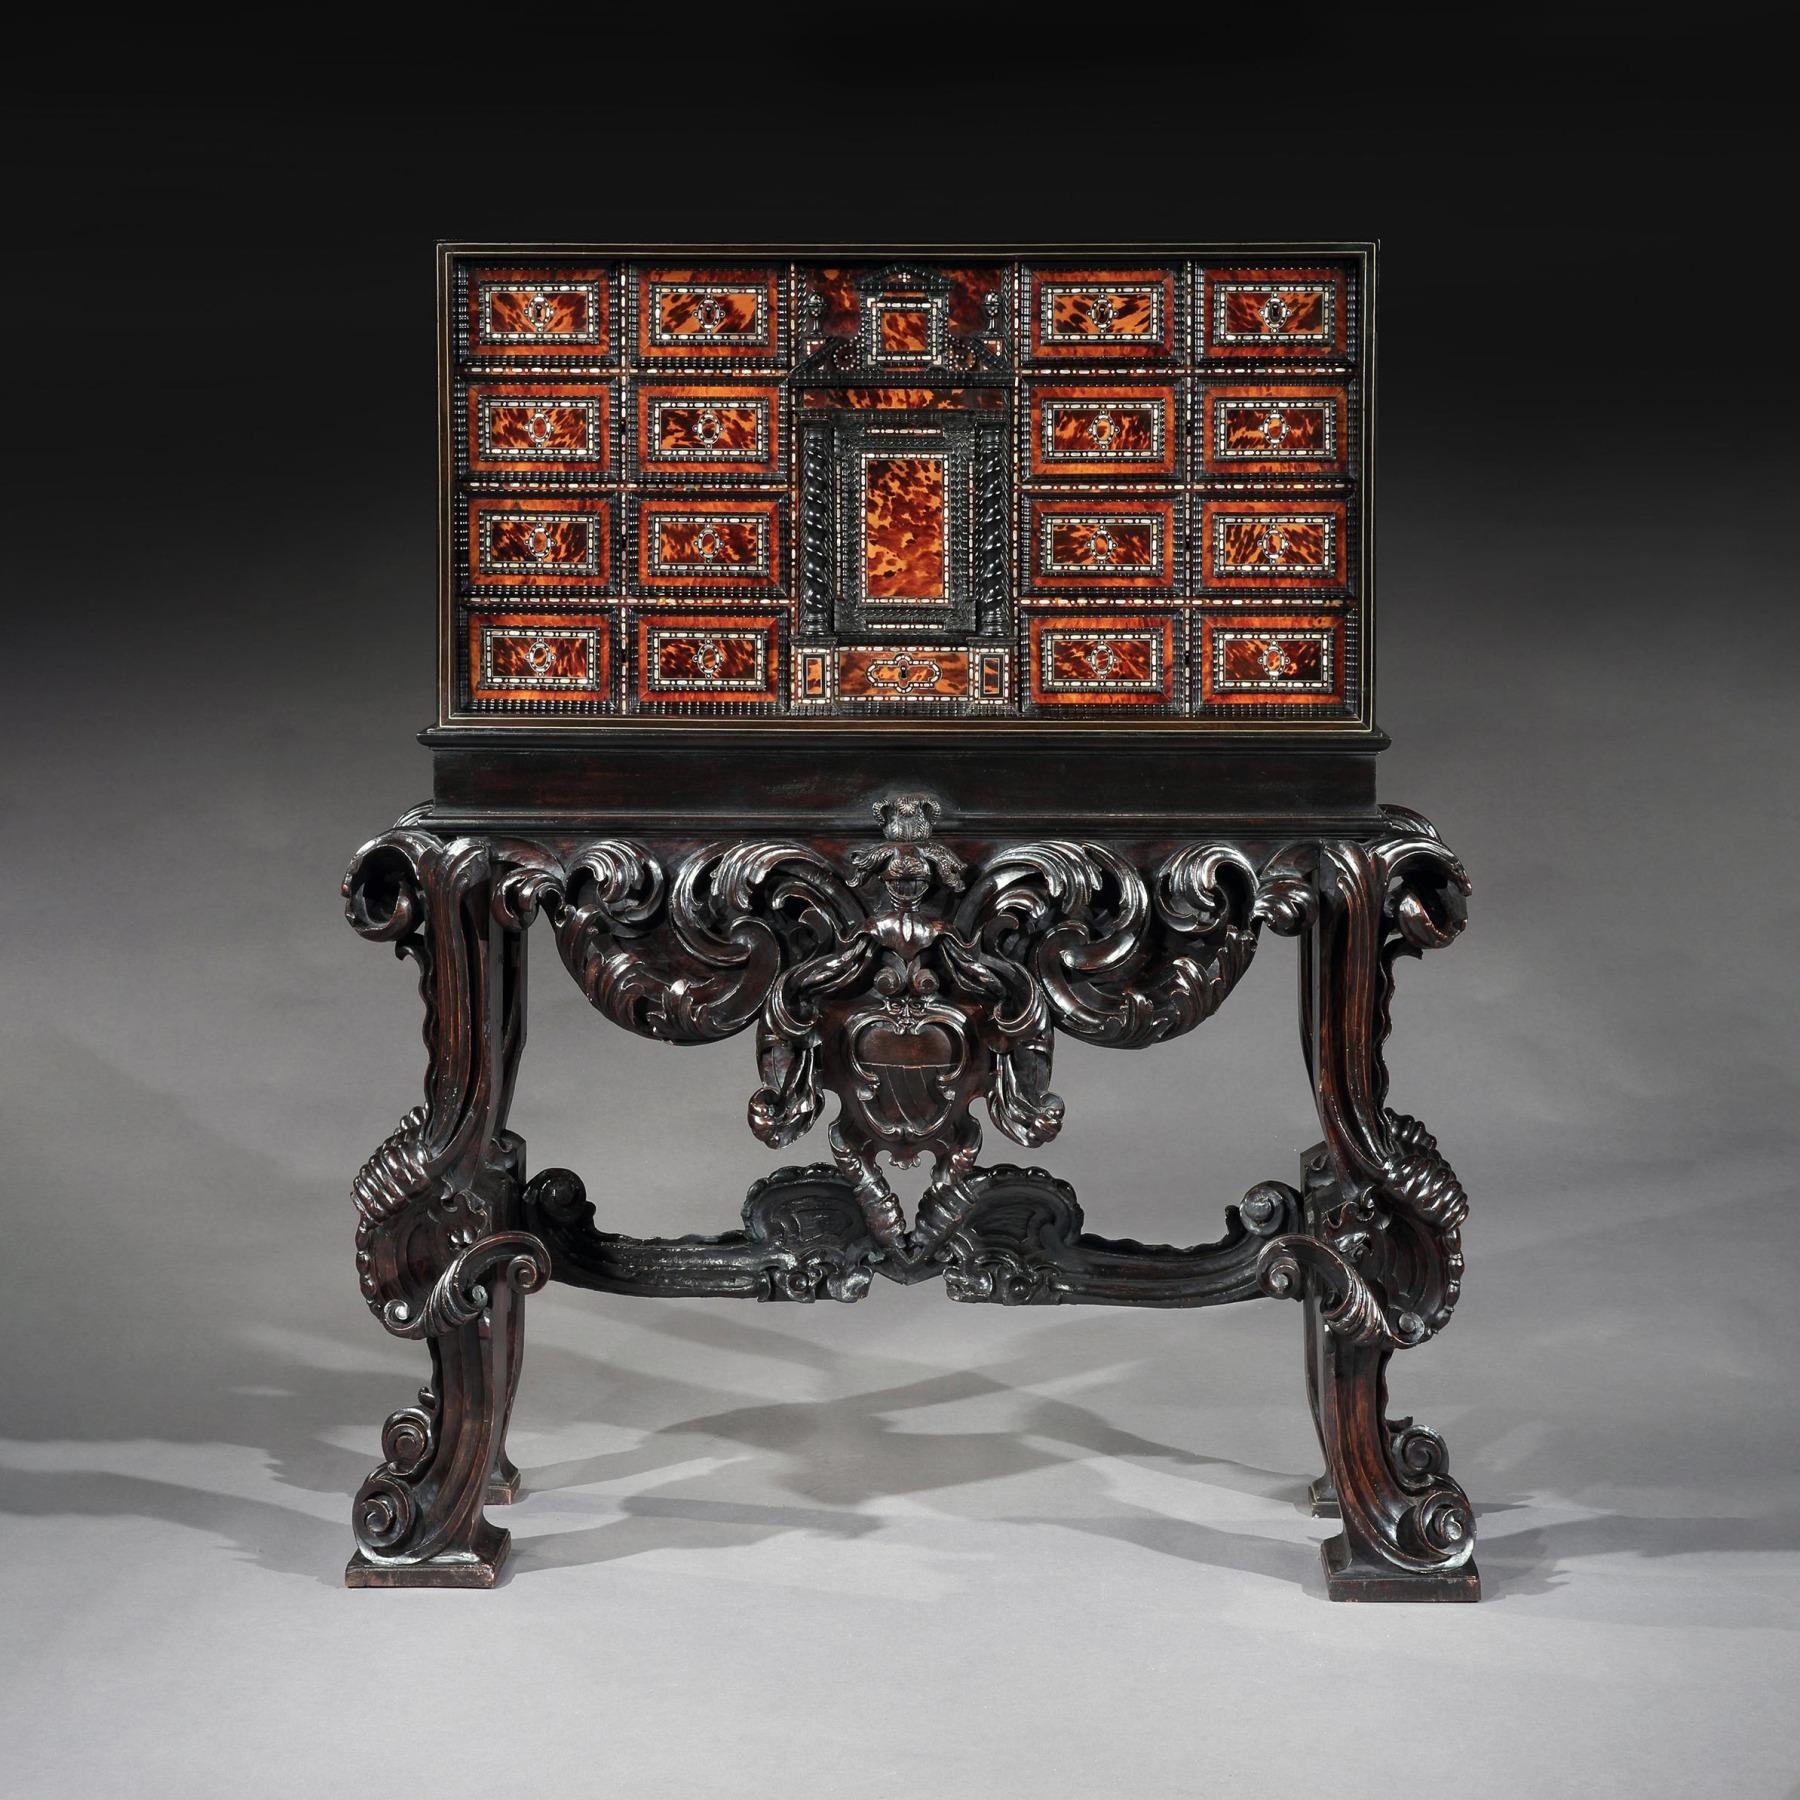 Rare 17th Century Neapolitan Ebony Tortoiseshell and Mother of Pearl Cabinet For Sale 4